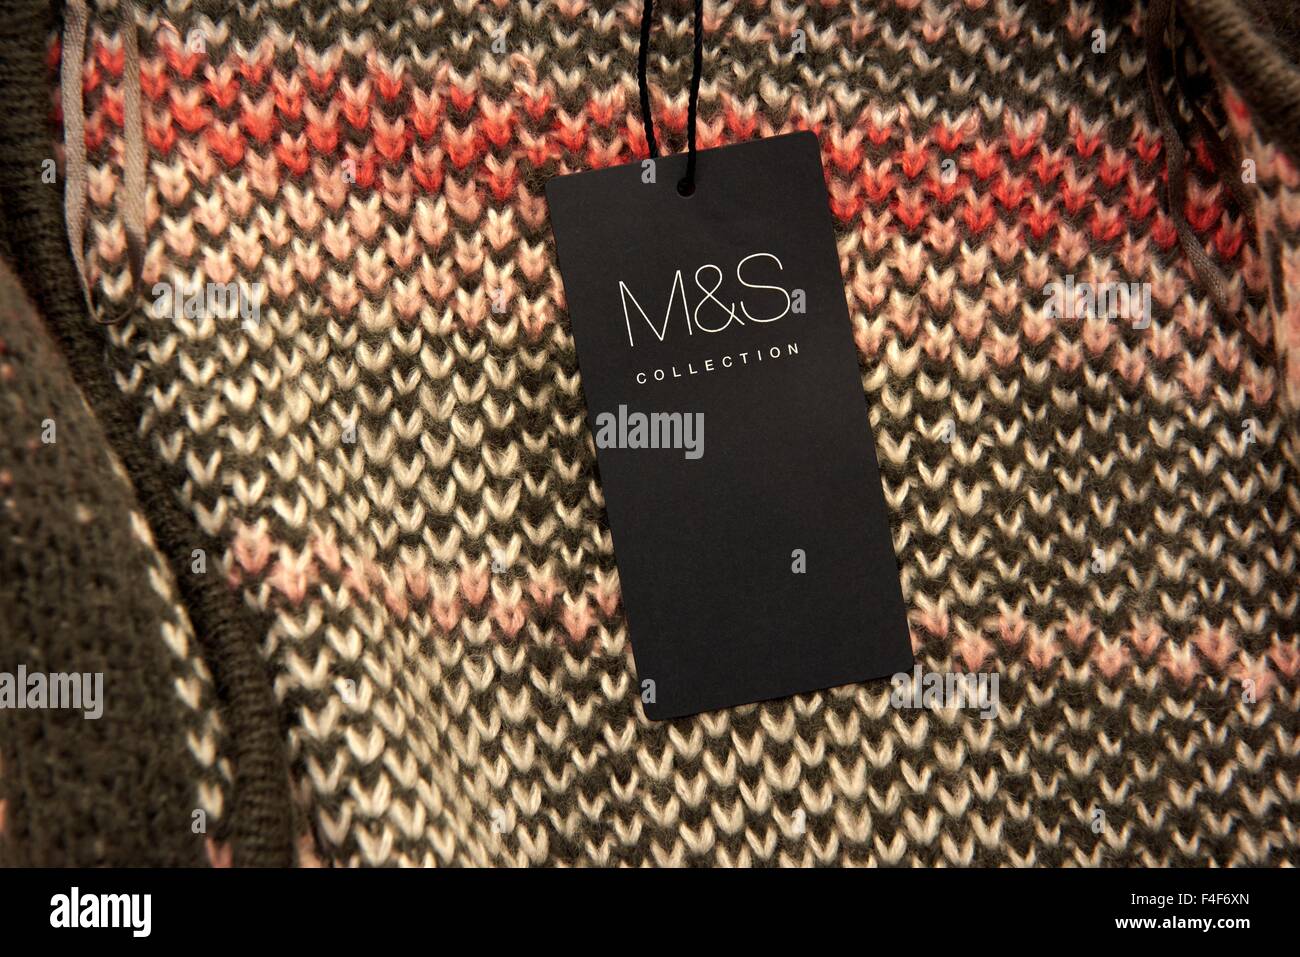 M&S Collection fashion label Stock Photo - Alamy